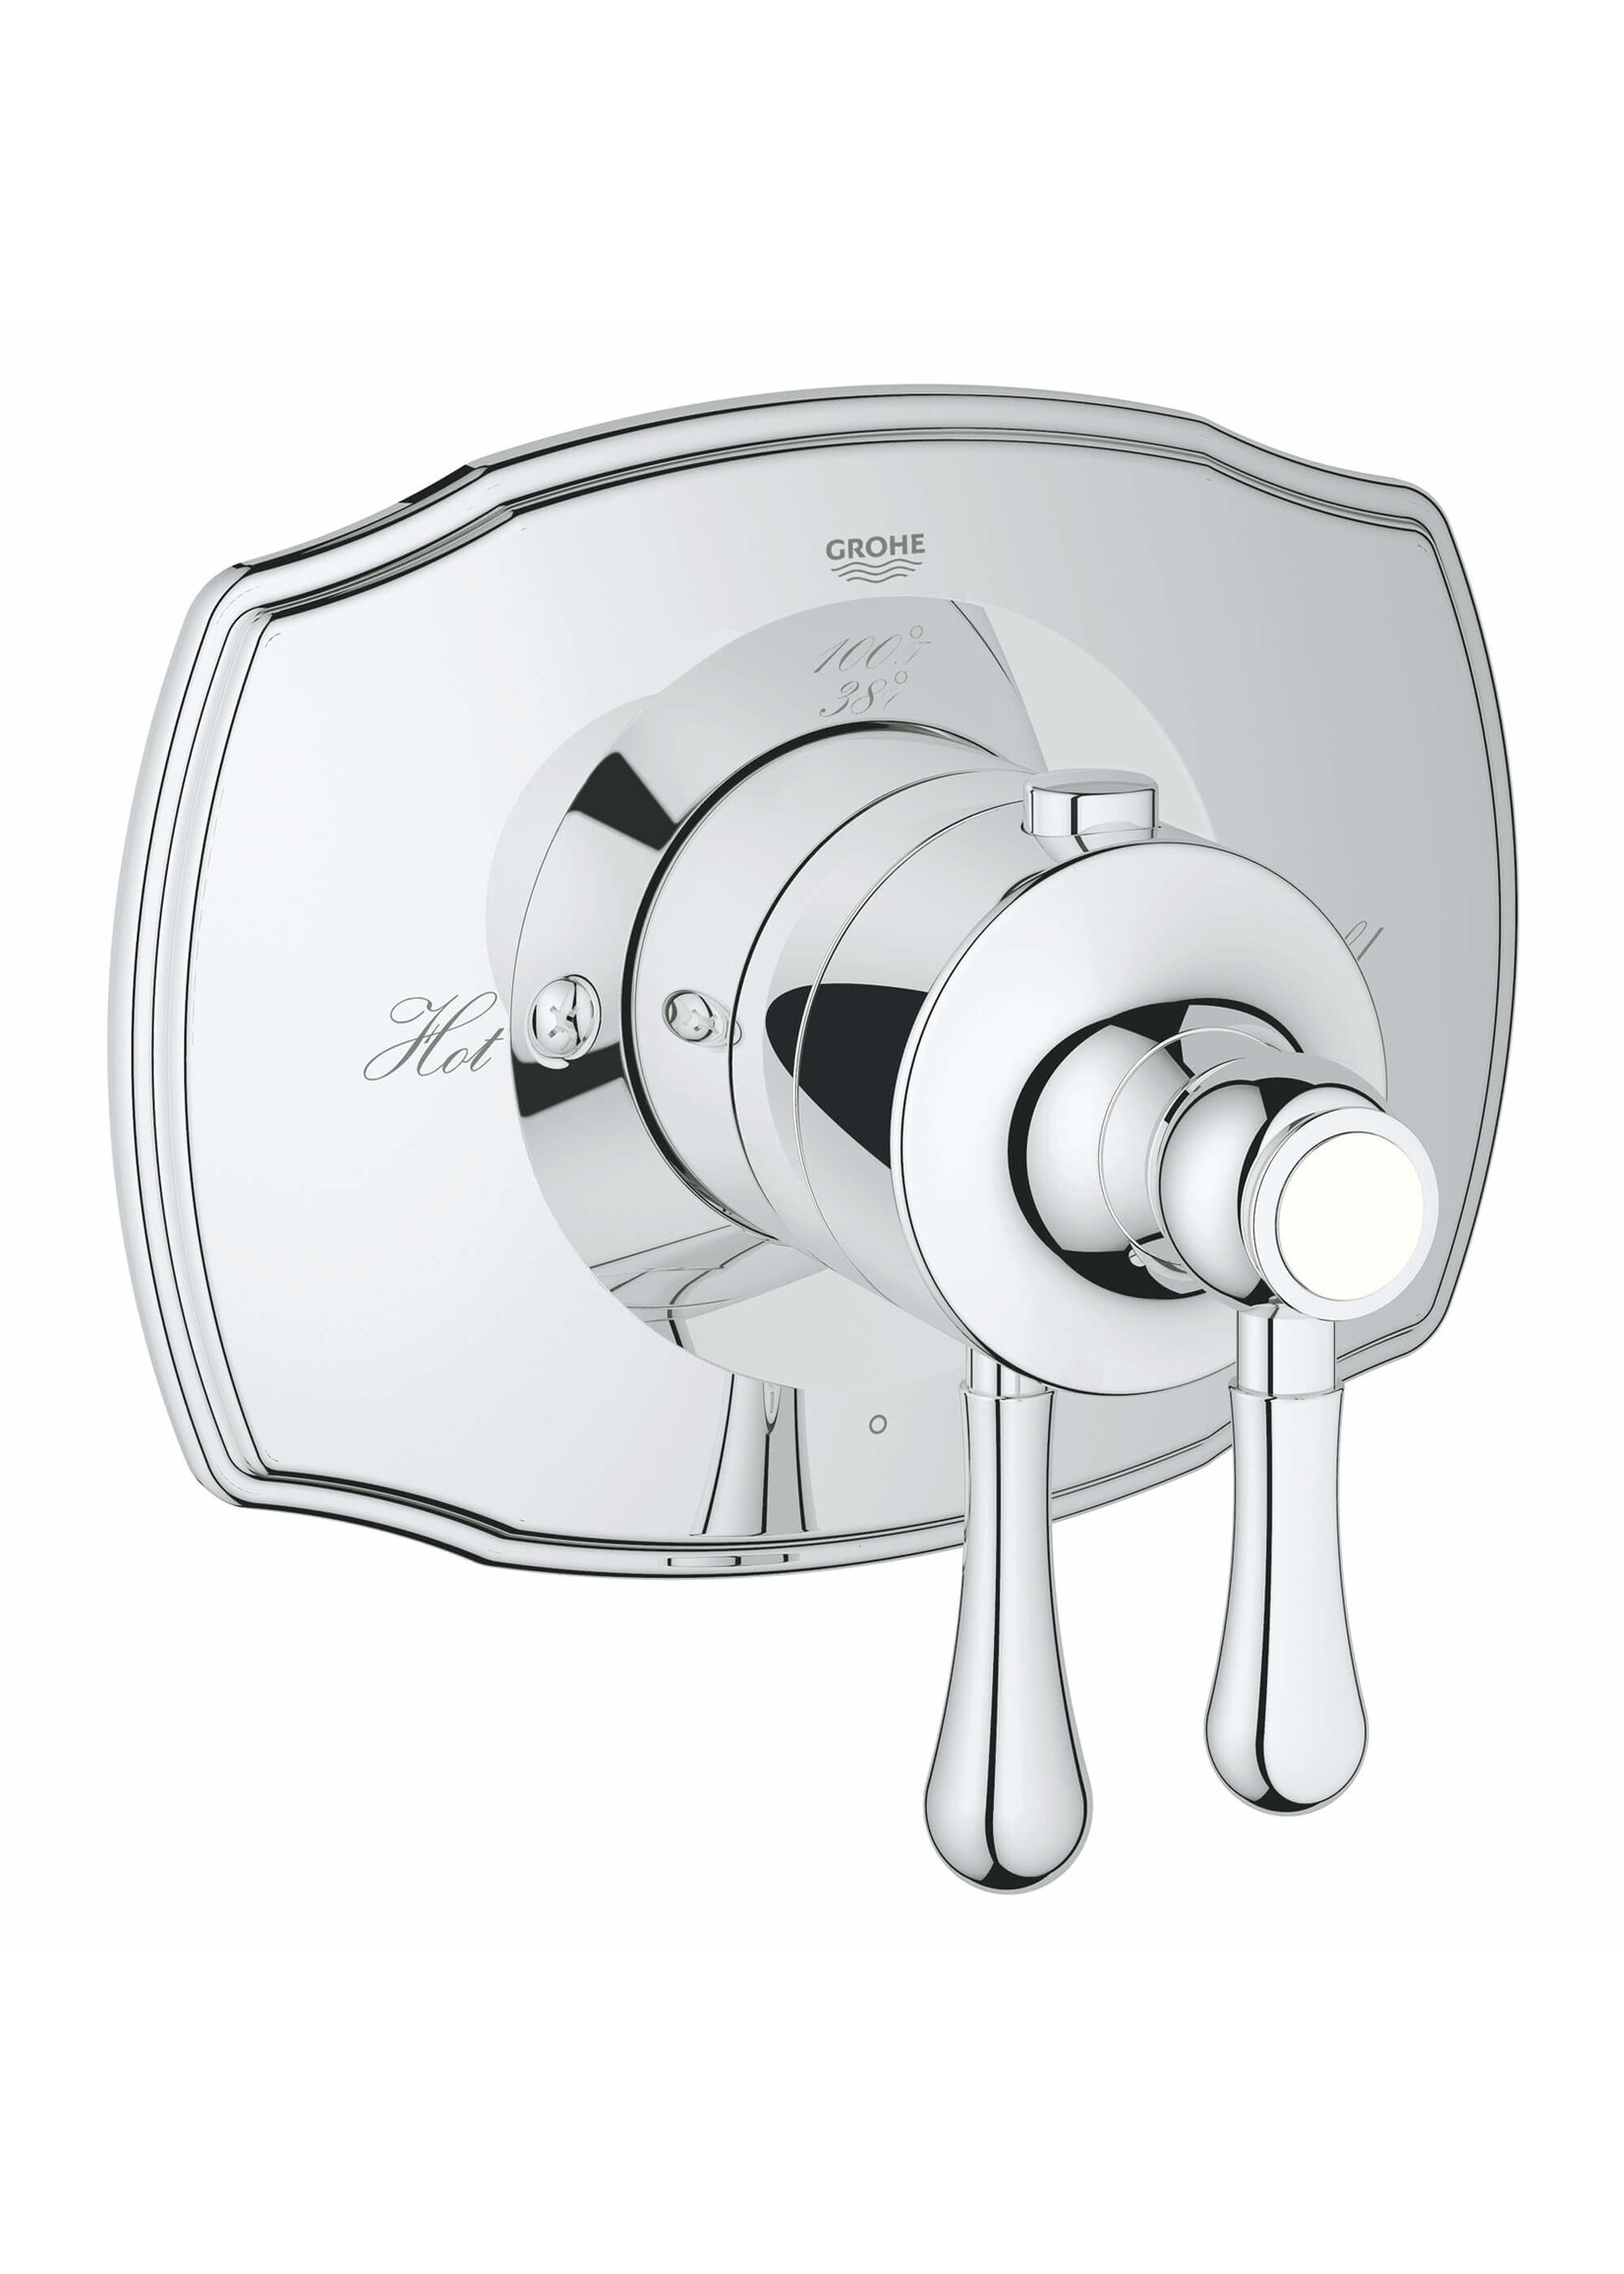 Grohe Grohe Grohflex® Authentic Sigrohe Grohflex® Authentic Single Function Thermostatic Trim Chrome